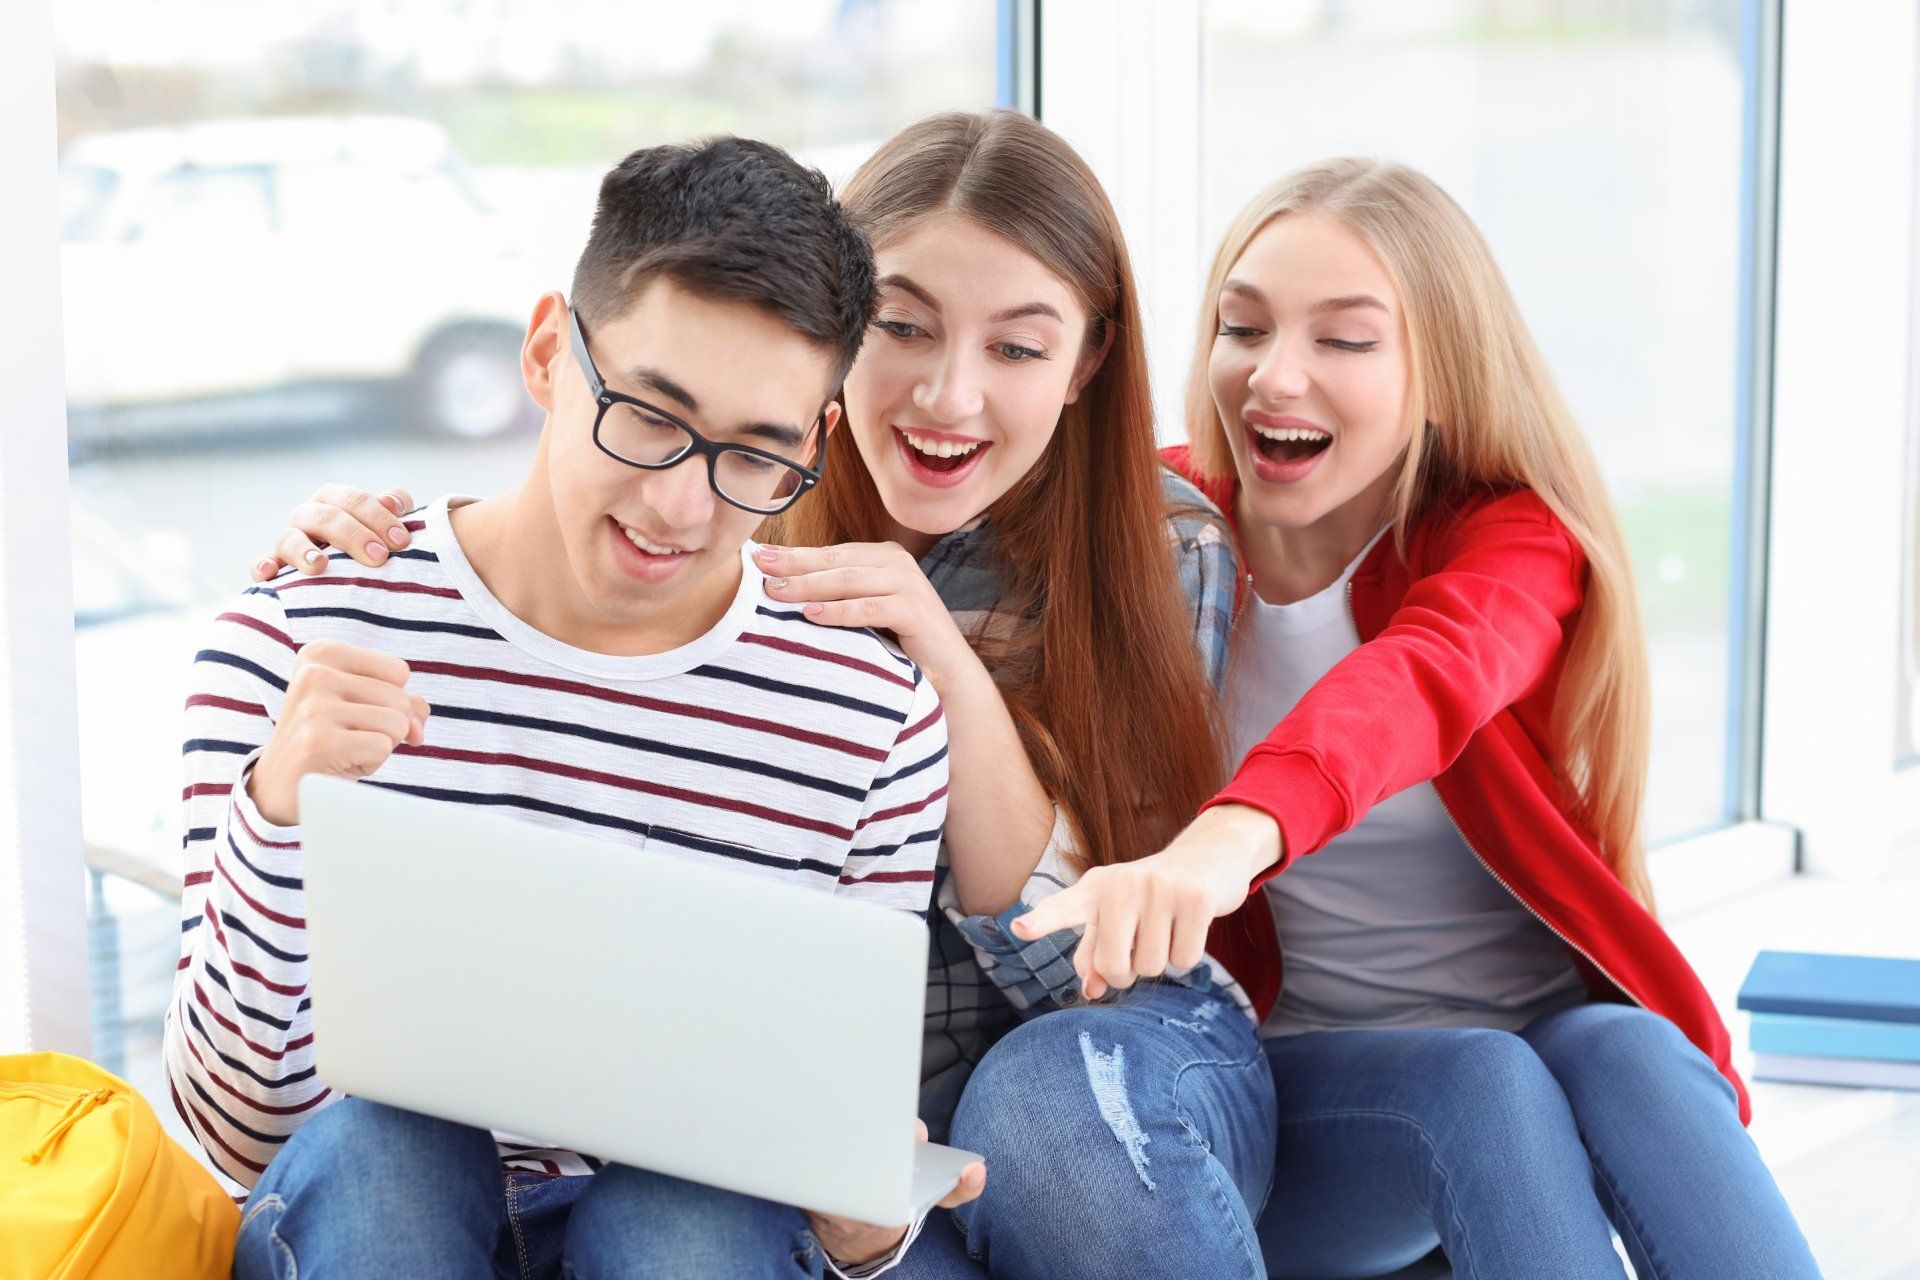 A male student holding a laptop and two female students cheer as they check their grades - A-levels